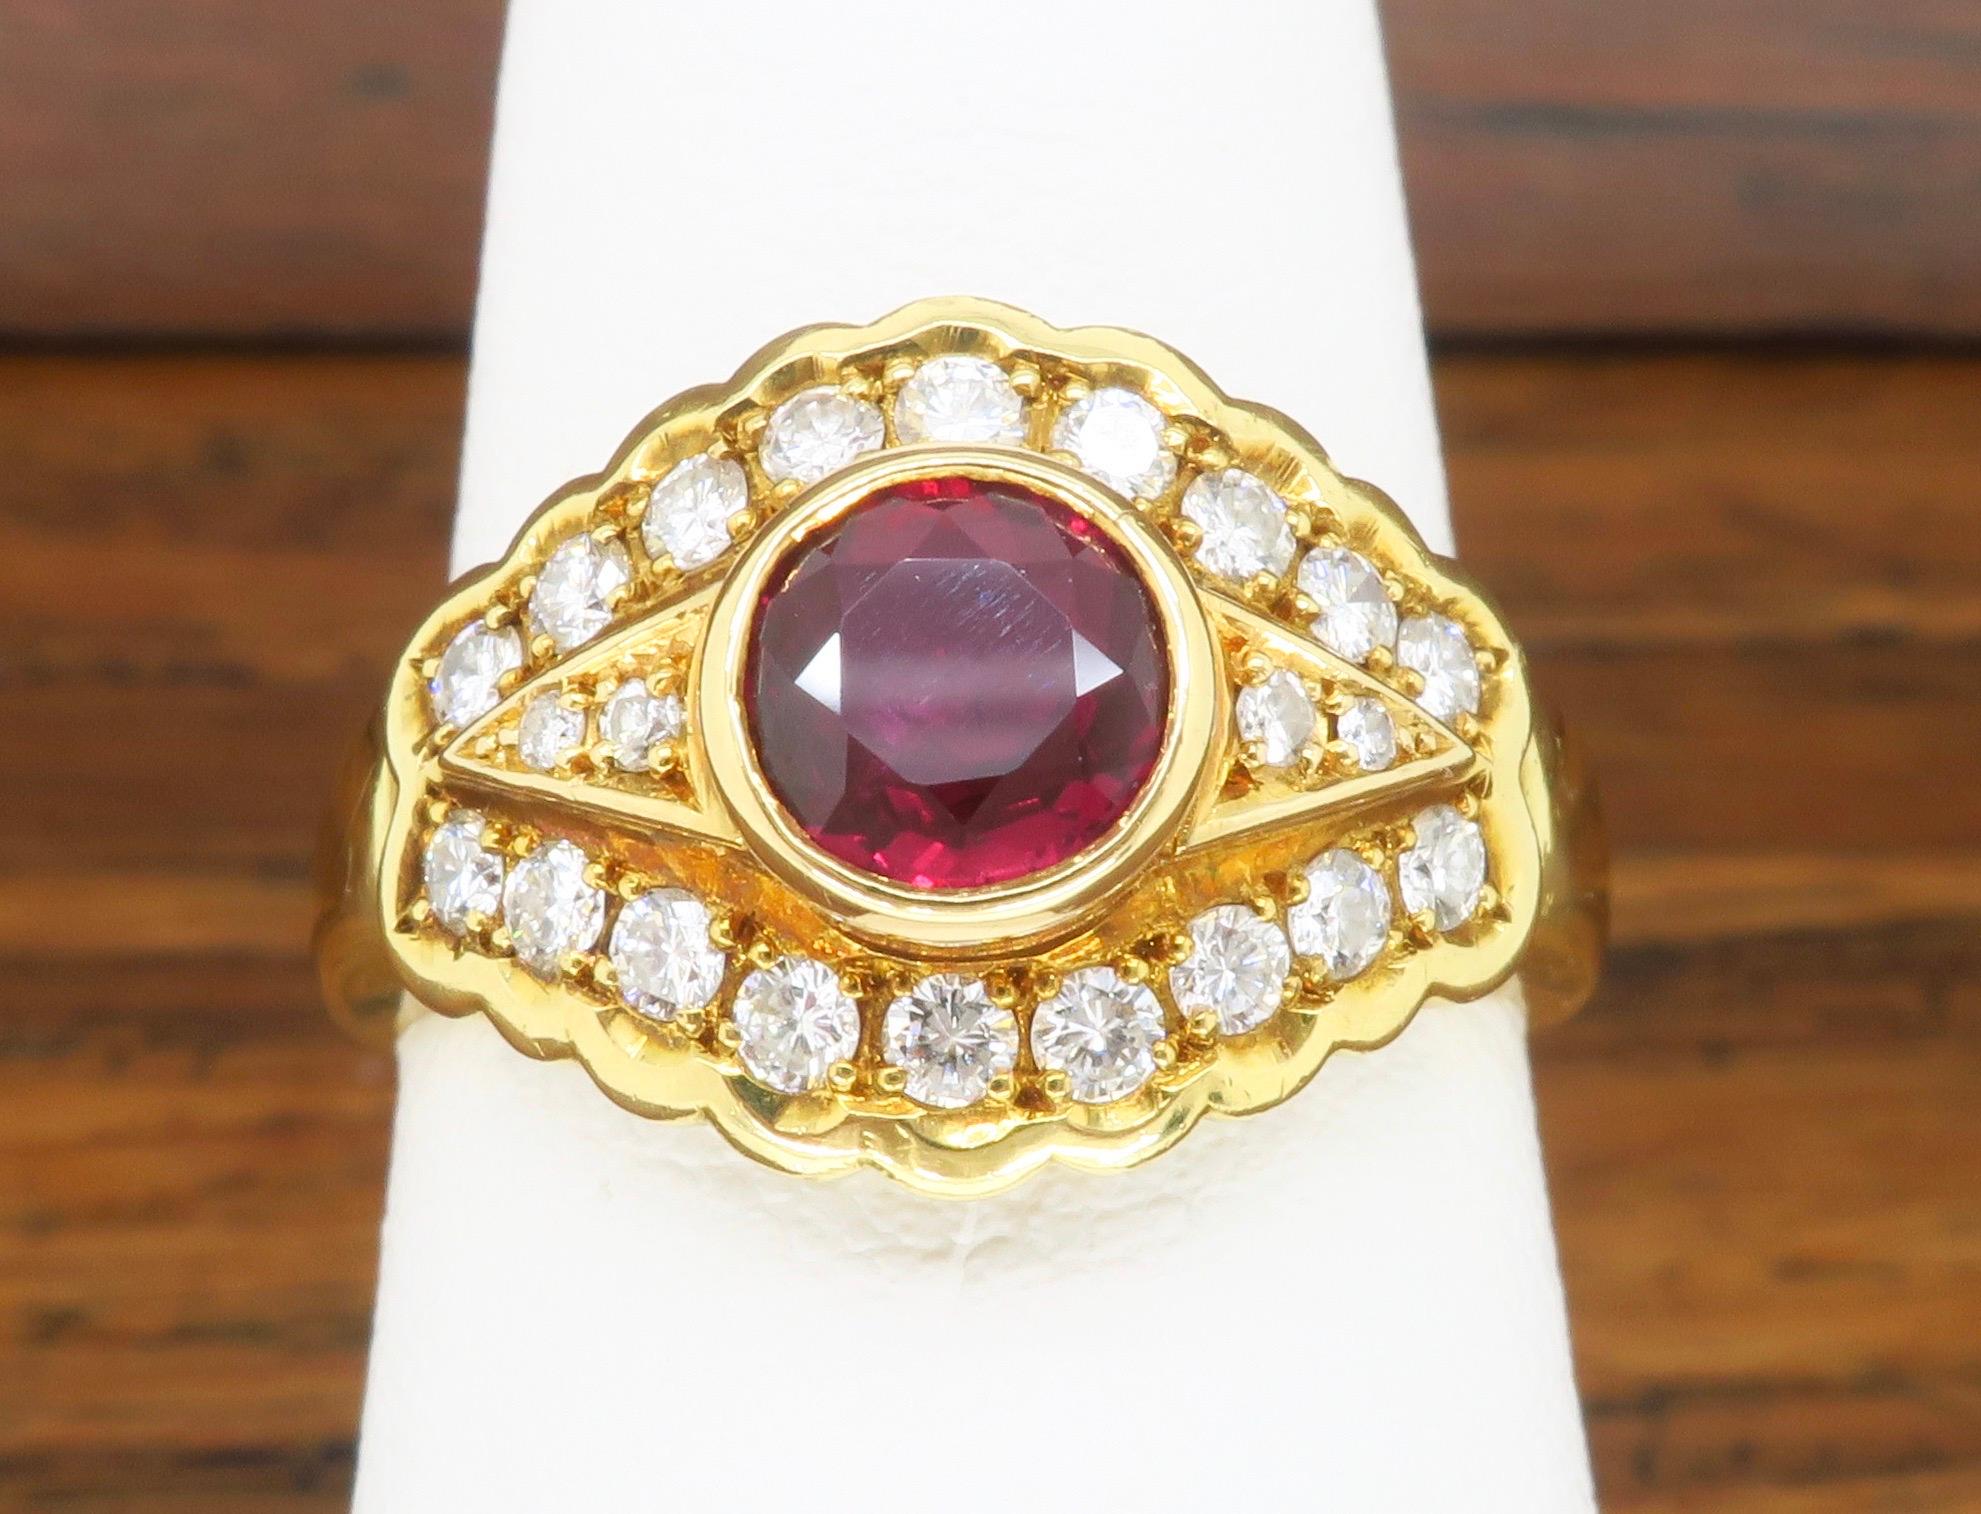 18k Yellow Gold ring mounted with a .78ct Round Ruby, flanked by .39ctw of white diamonds. 

Gemstone: Diamond and Ruby
Gemstone Carat Weight: .78ct Round Ruby
Diamond Carat Weight: .39ctw
Diamond Cut: Round Brilliant Cut  
Metal: 18k Yellow Gold